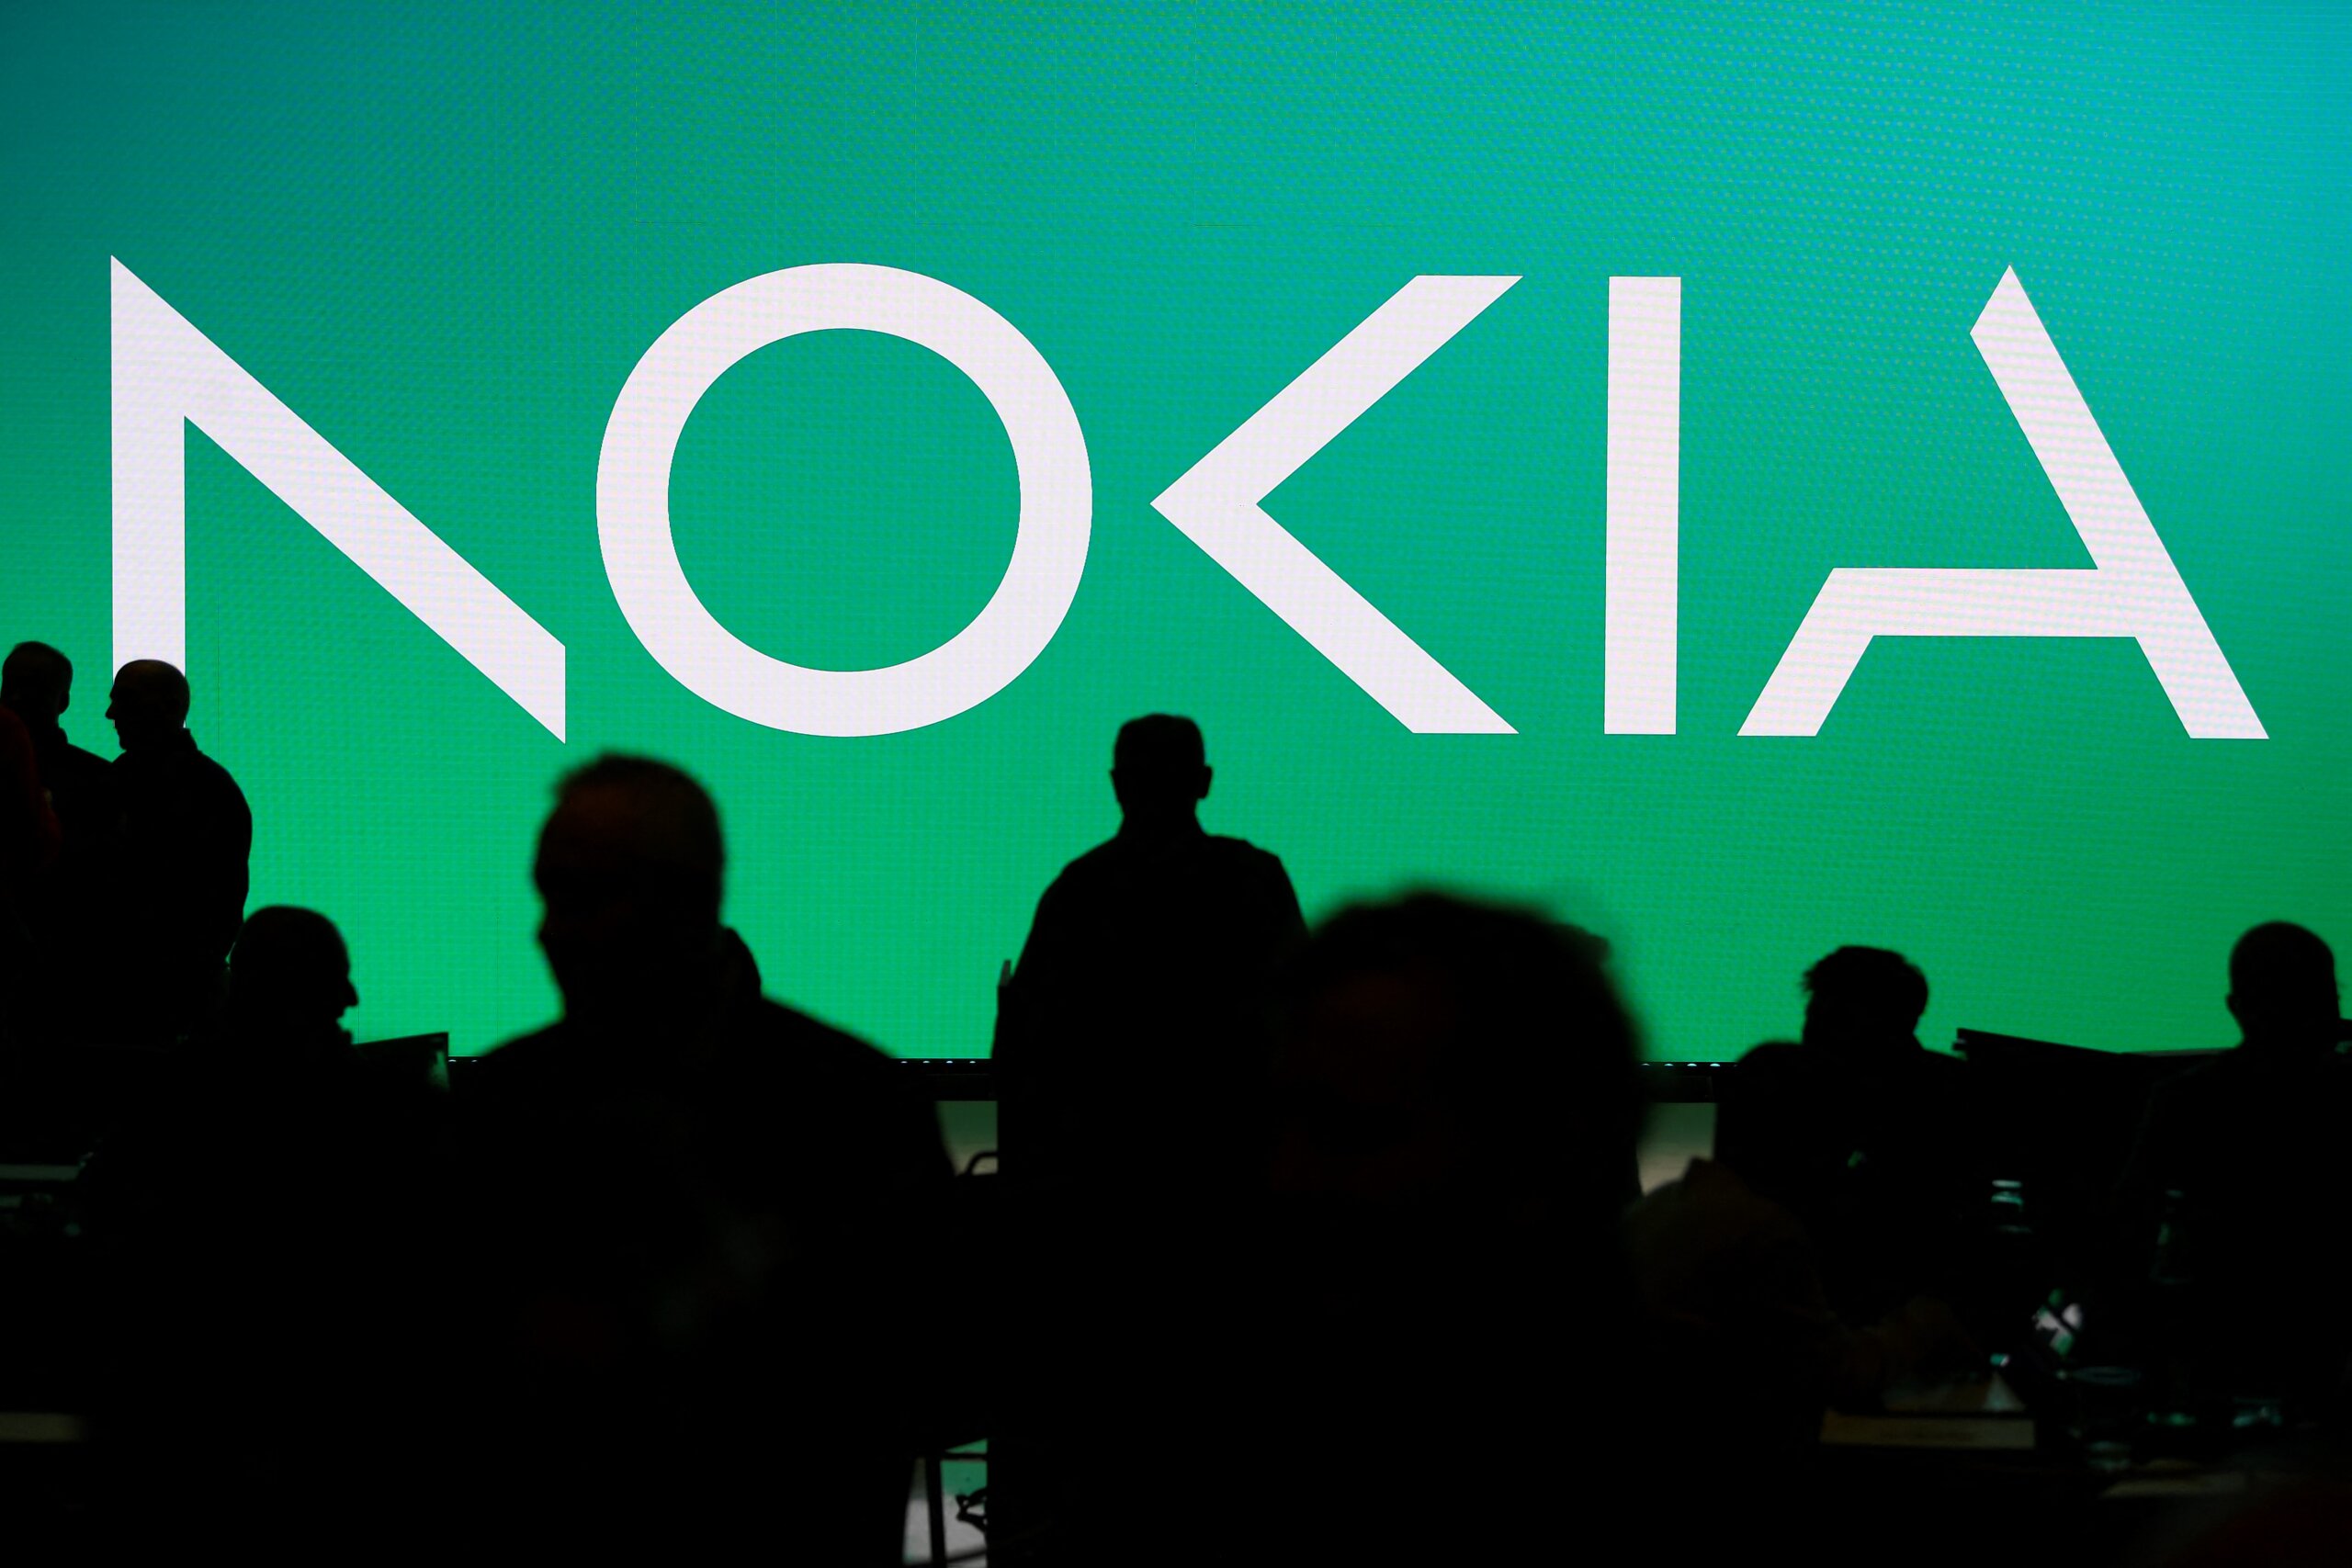 Nokia has been investing and developing 5G technology in India. 